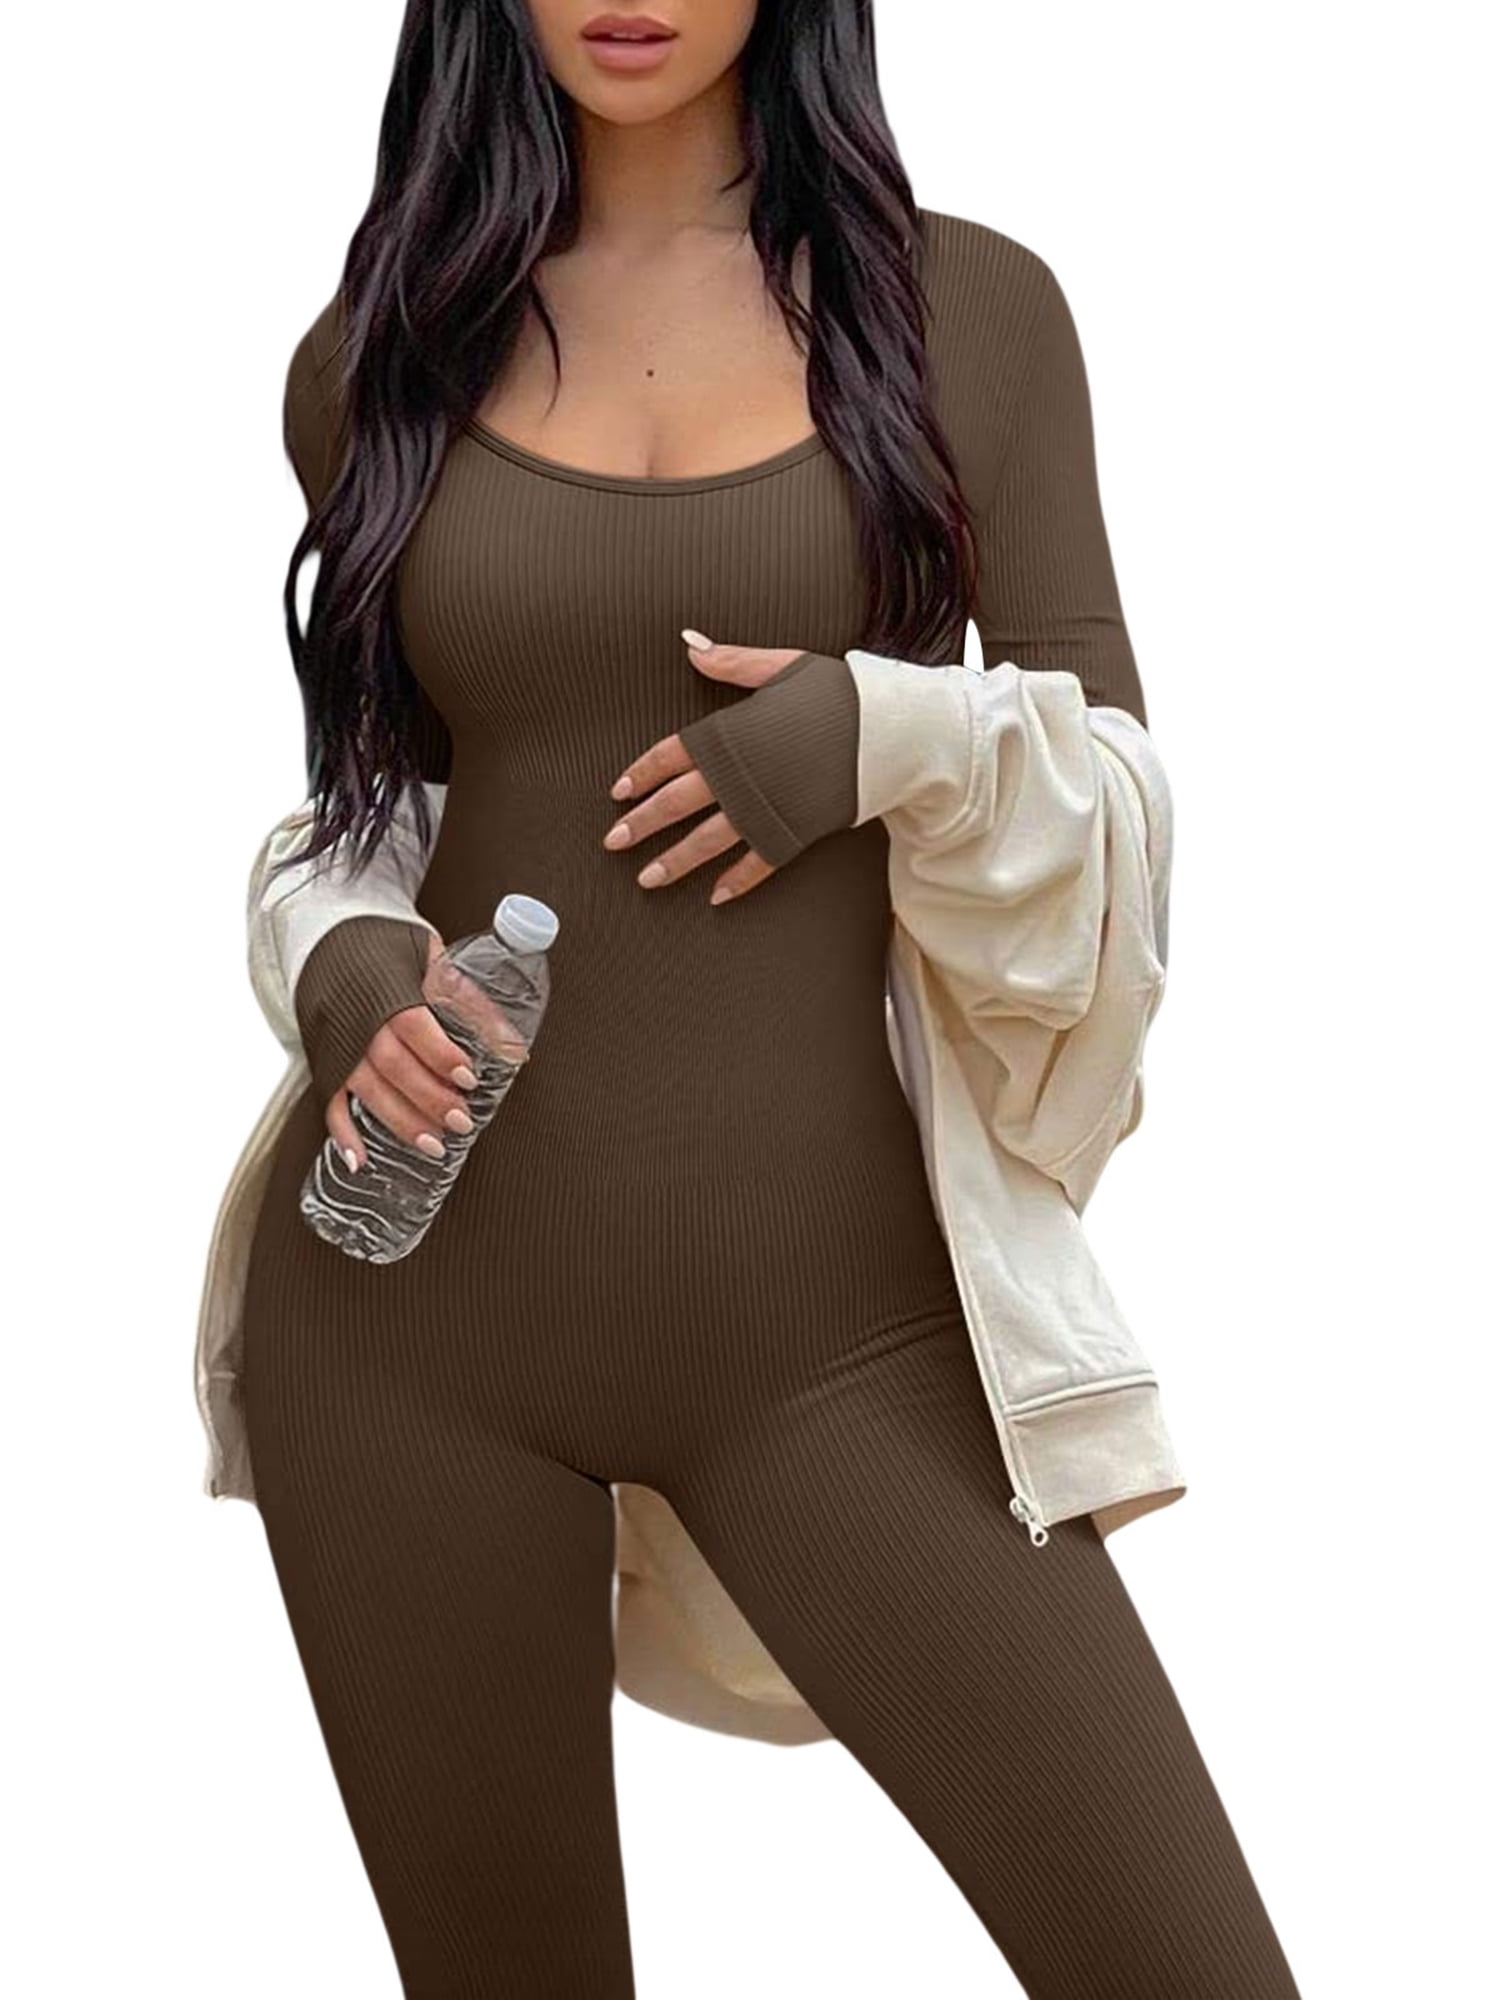 Bandage Bodycon Jumpsuit Long Sleeve Stacked One Piece